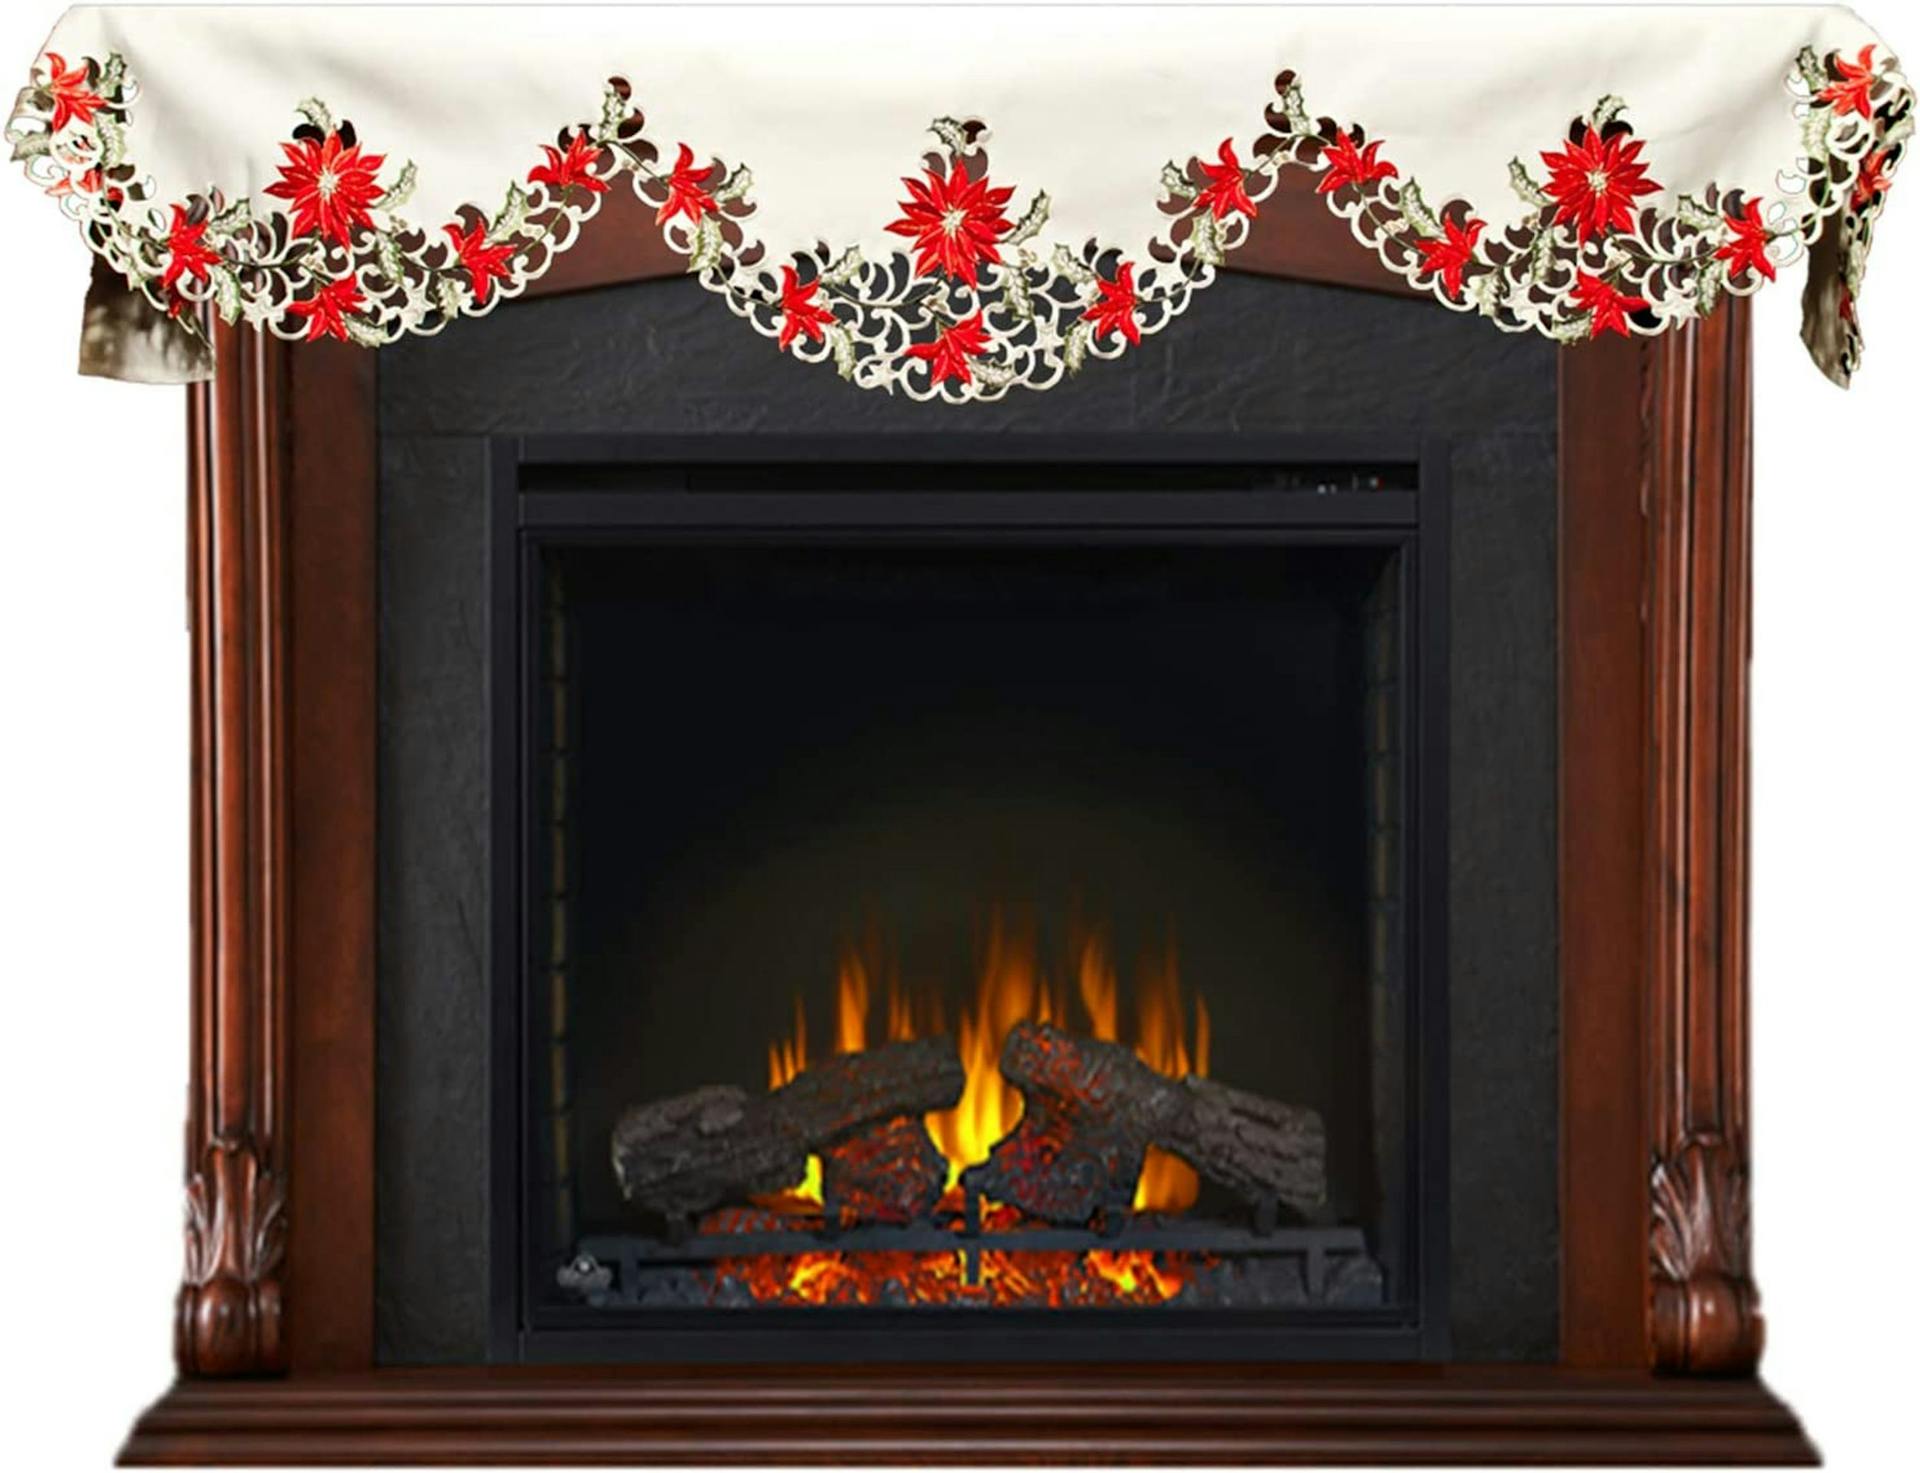 Embroidered Christmas Holiday Poinsettia Mantel Scarf (19" x 90")